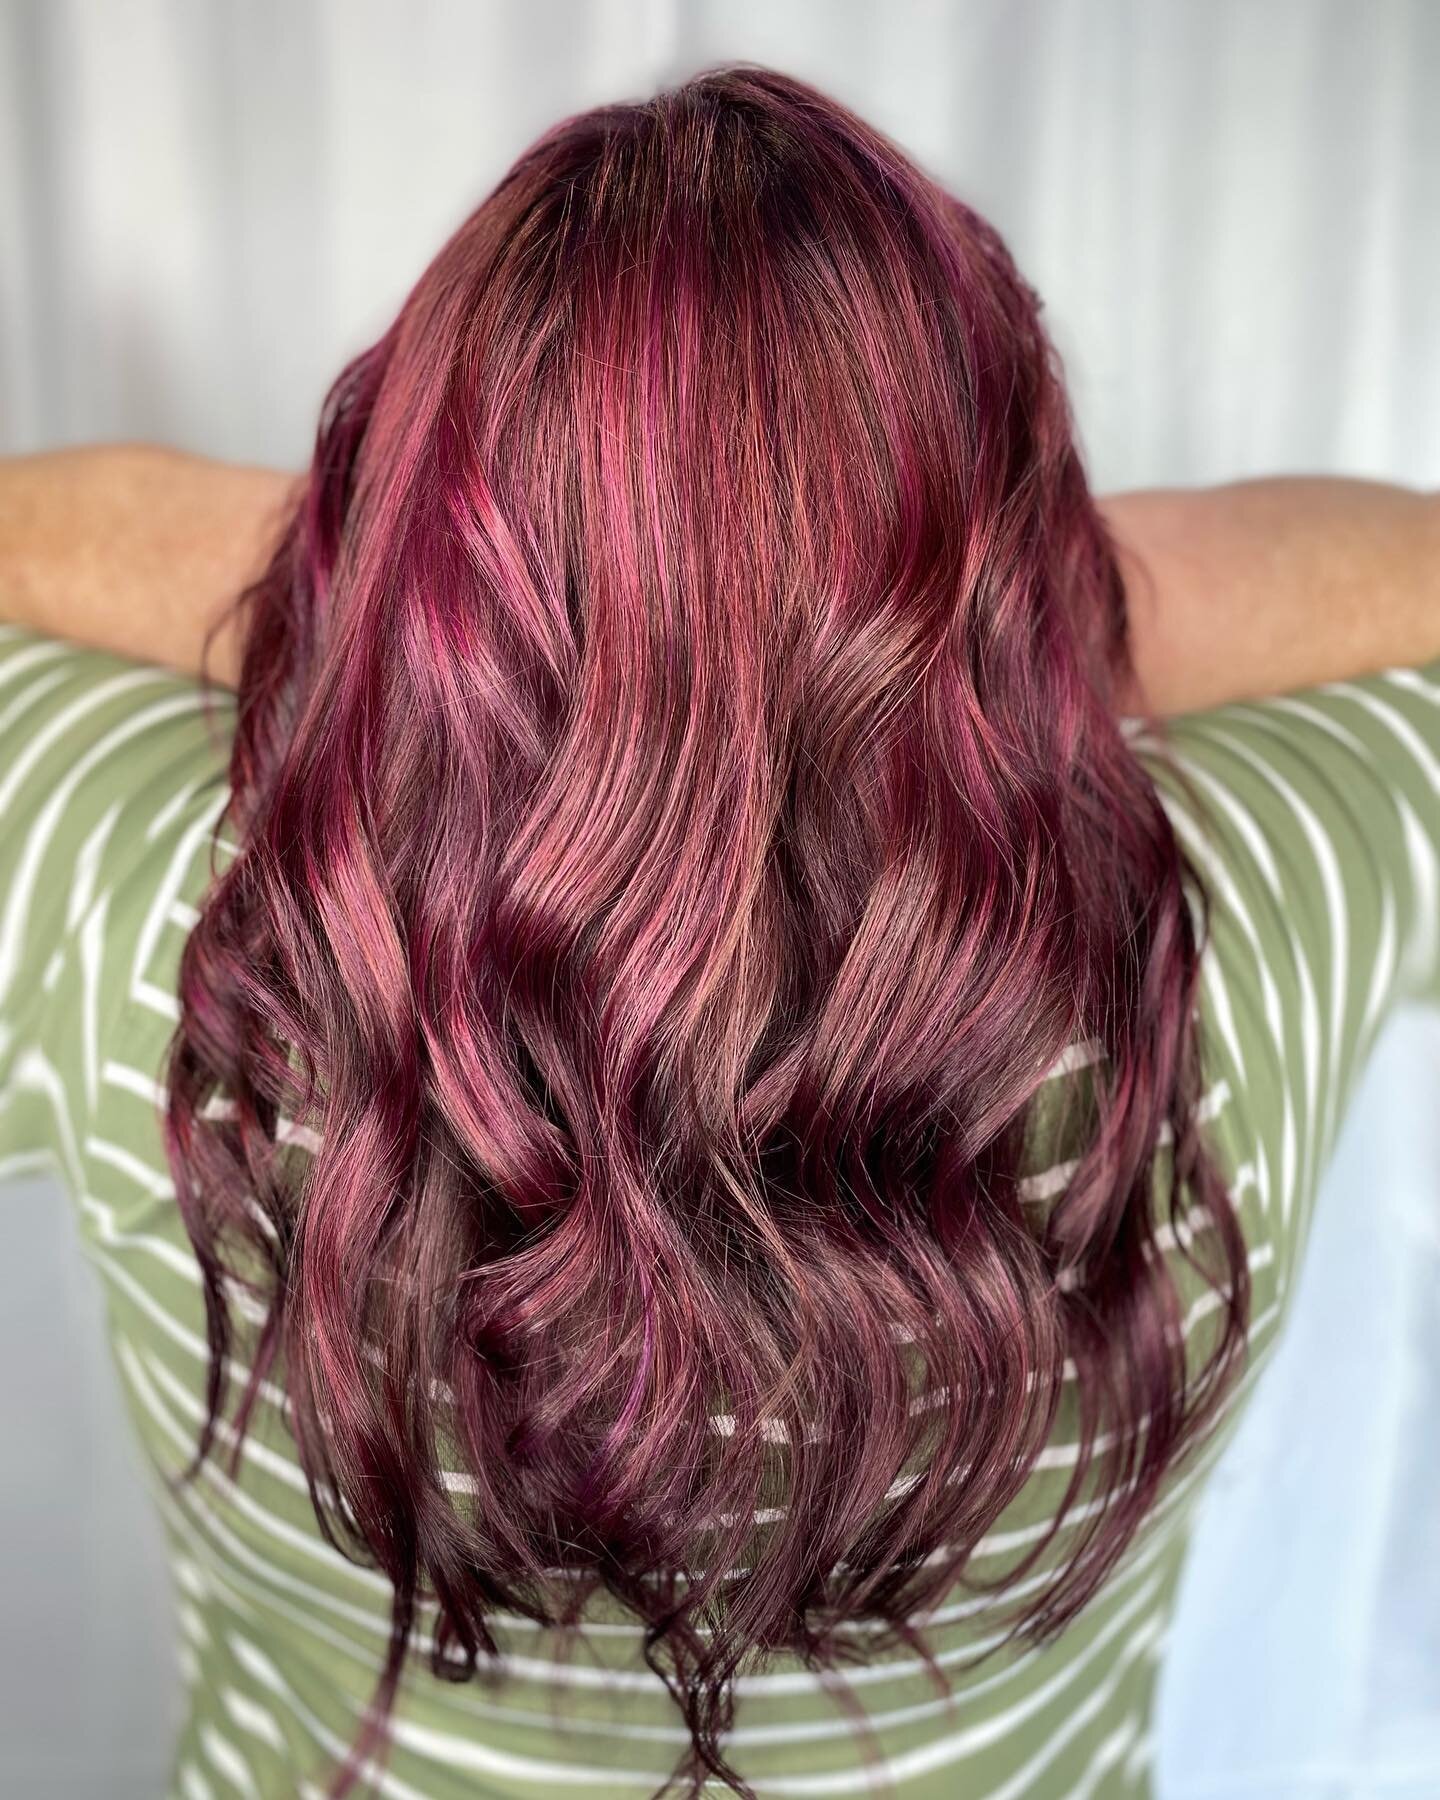 Beautiful Burgundy makeover for this beauty! Swipe for the before. I love how #goldwellcolor leaves the hair so shiny and healthy. 
#goldwellapprovedus 
#goldwellpurepigments 
#medinaoh 
#medinaohio 
#330stylist 
#medinaohsalon 
#wadsworthohio 
#fair